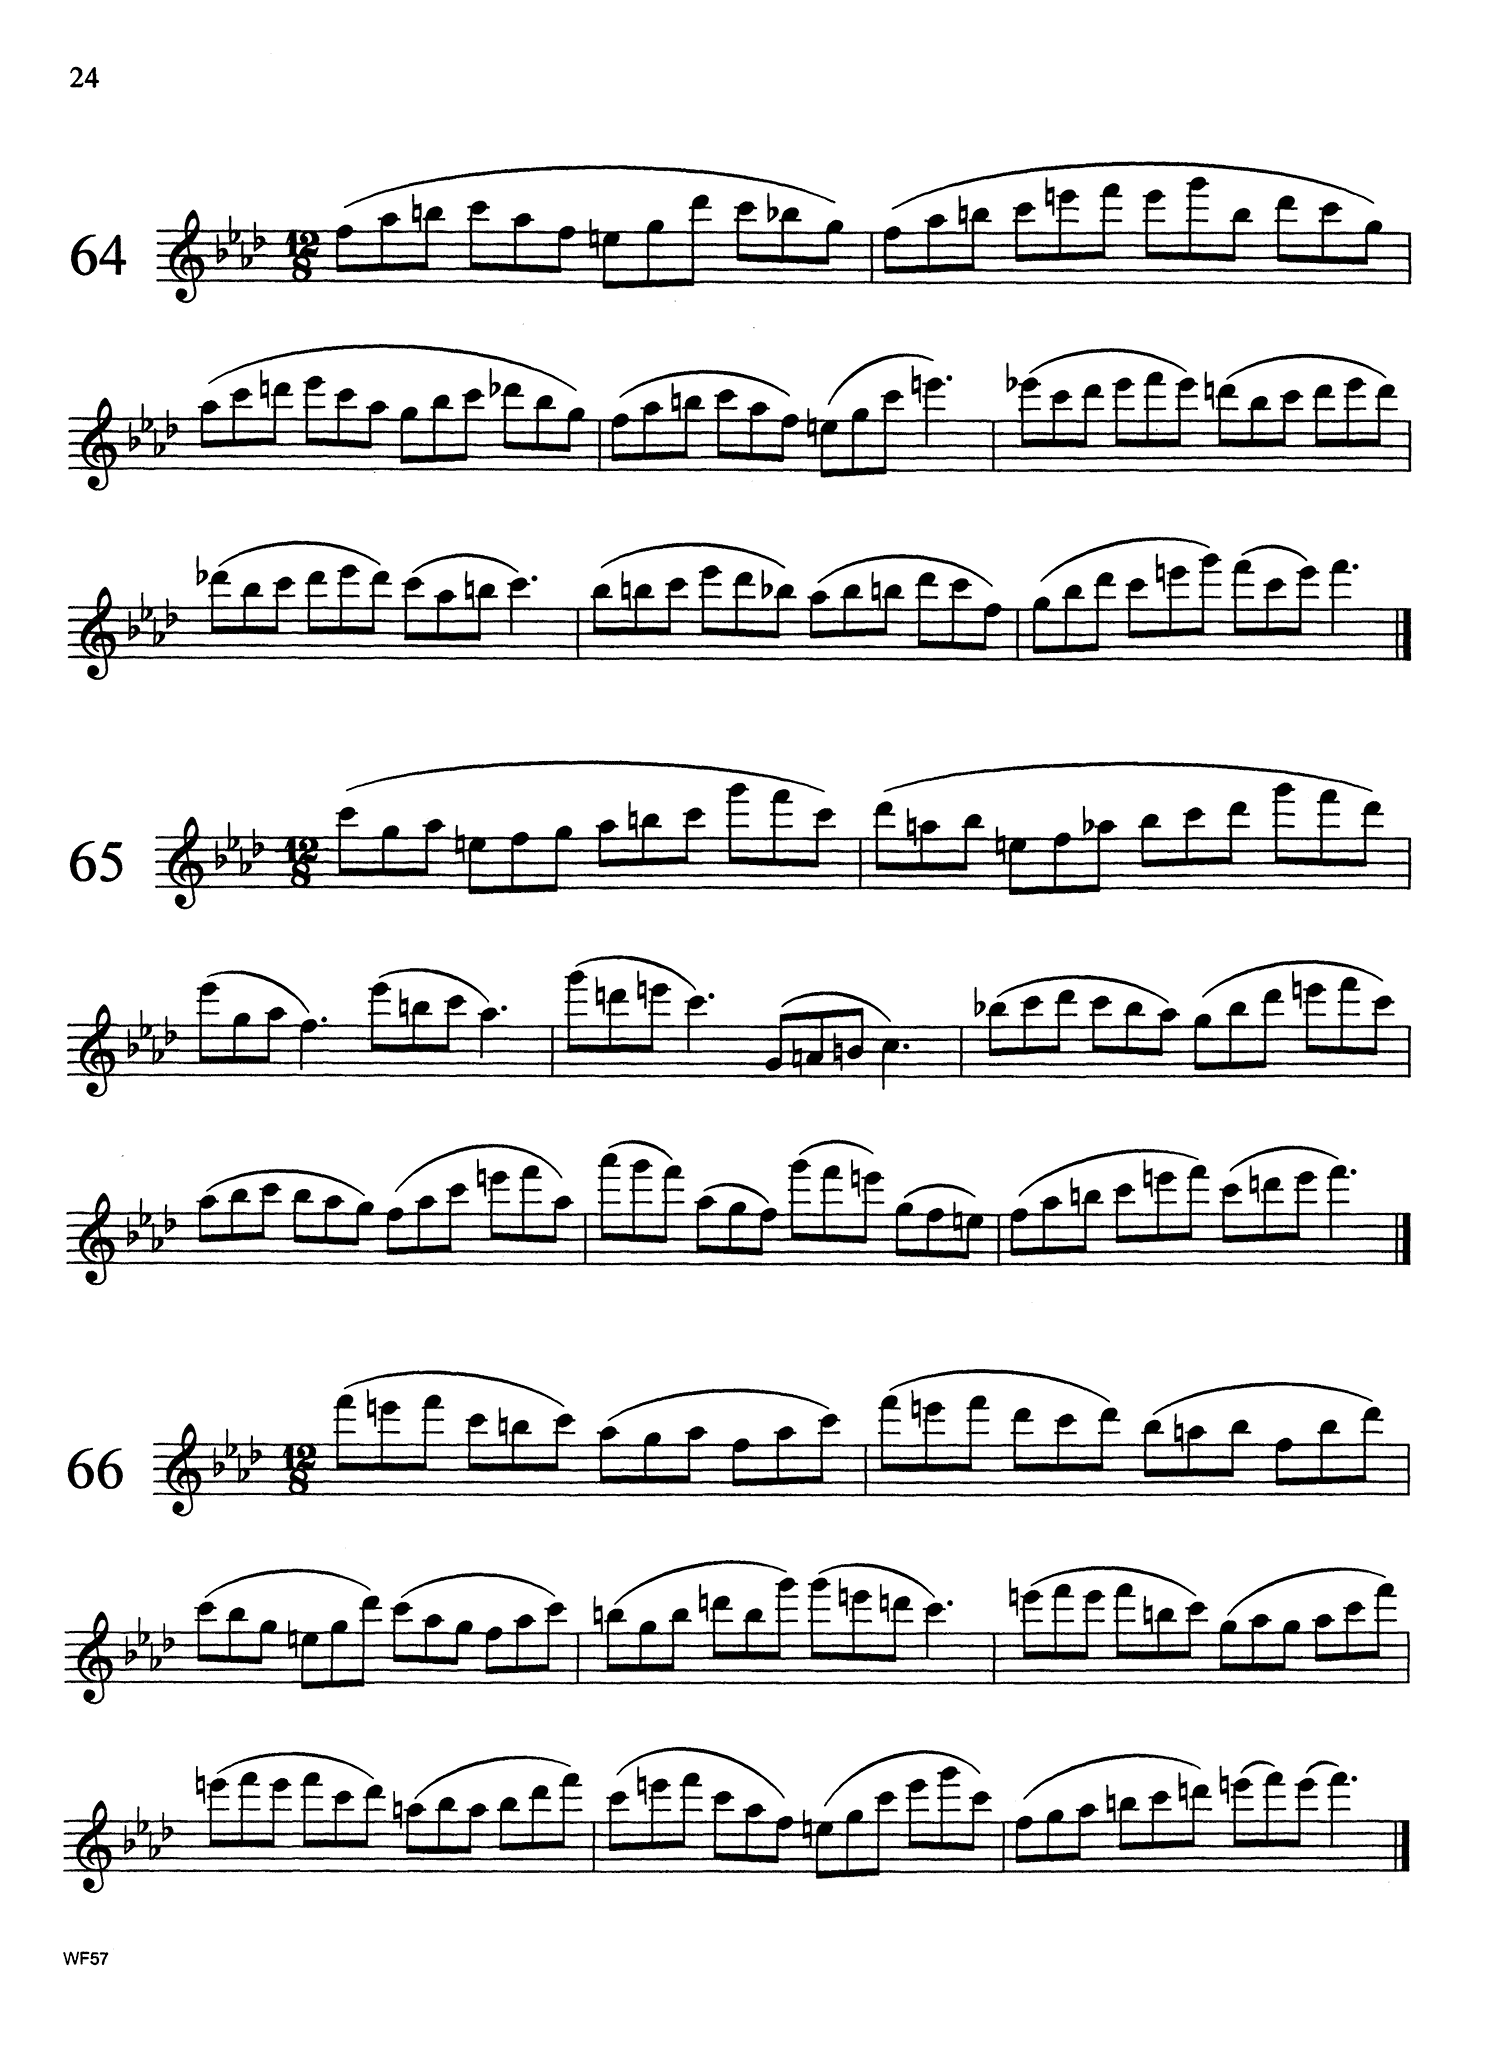 Altissimo Studies for Clarinet Page 24